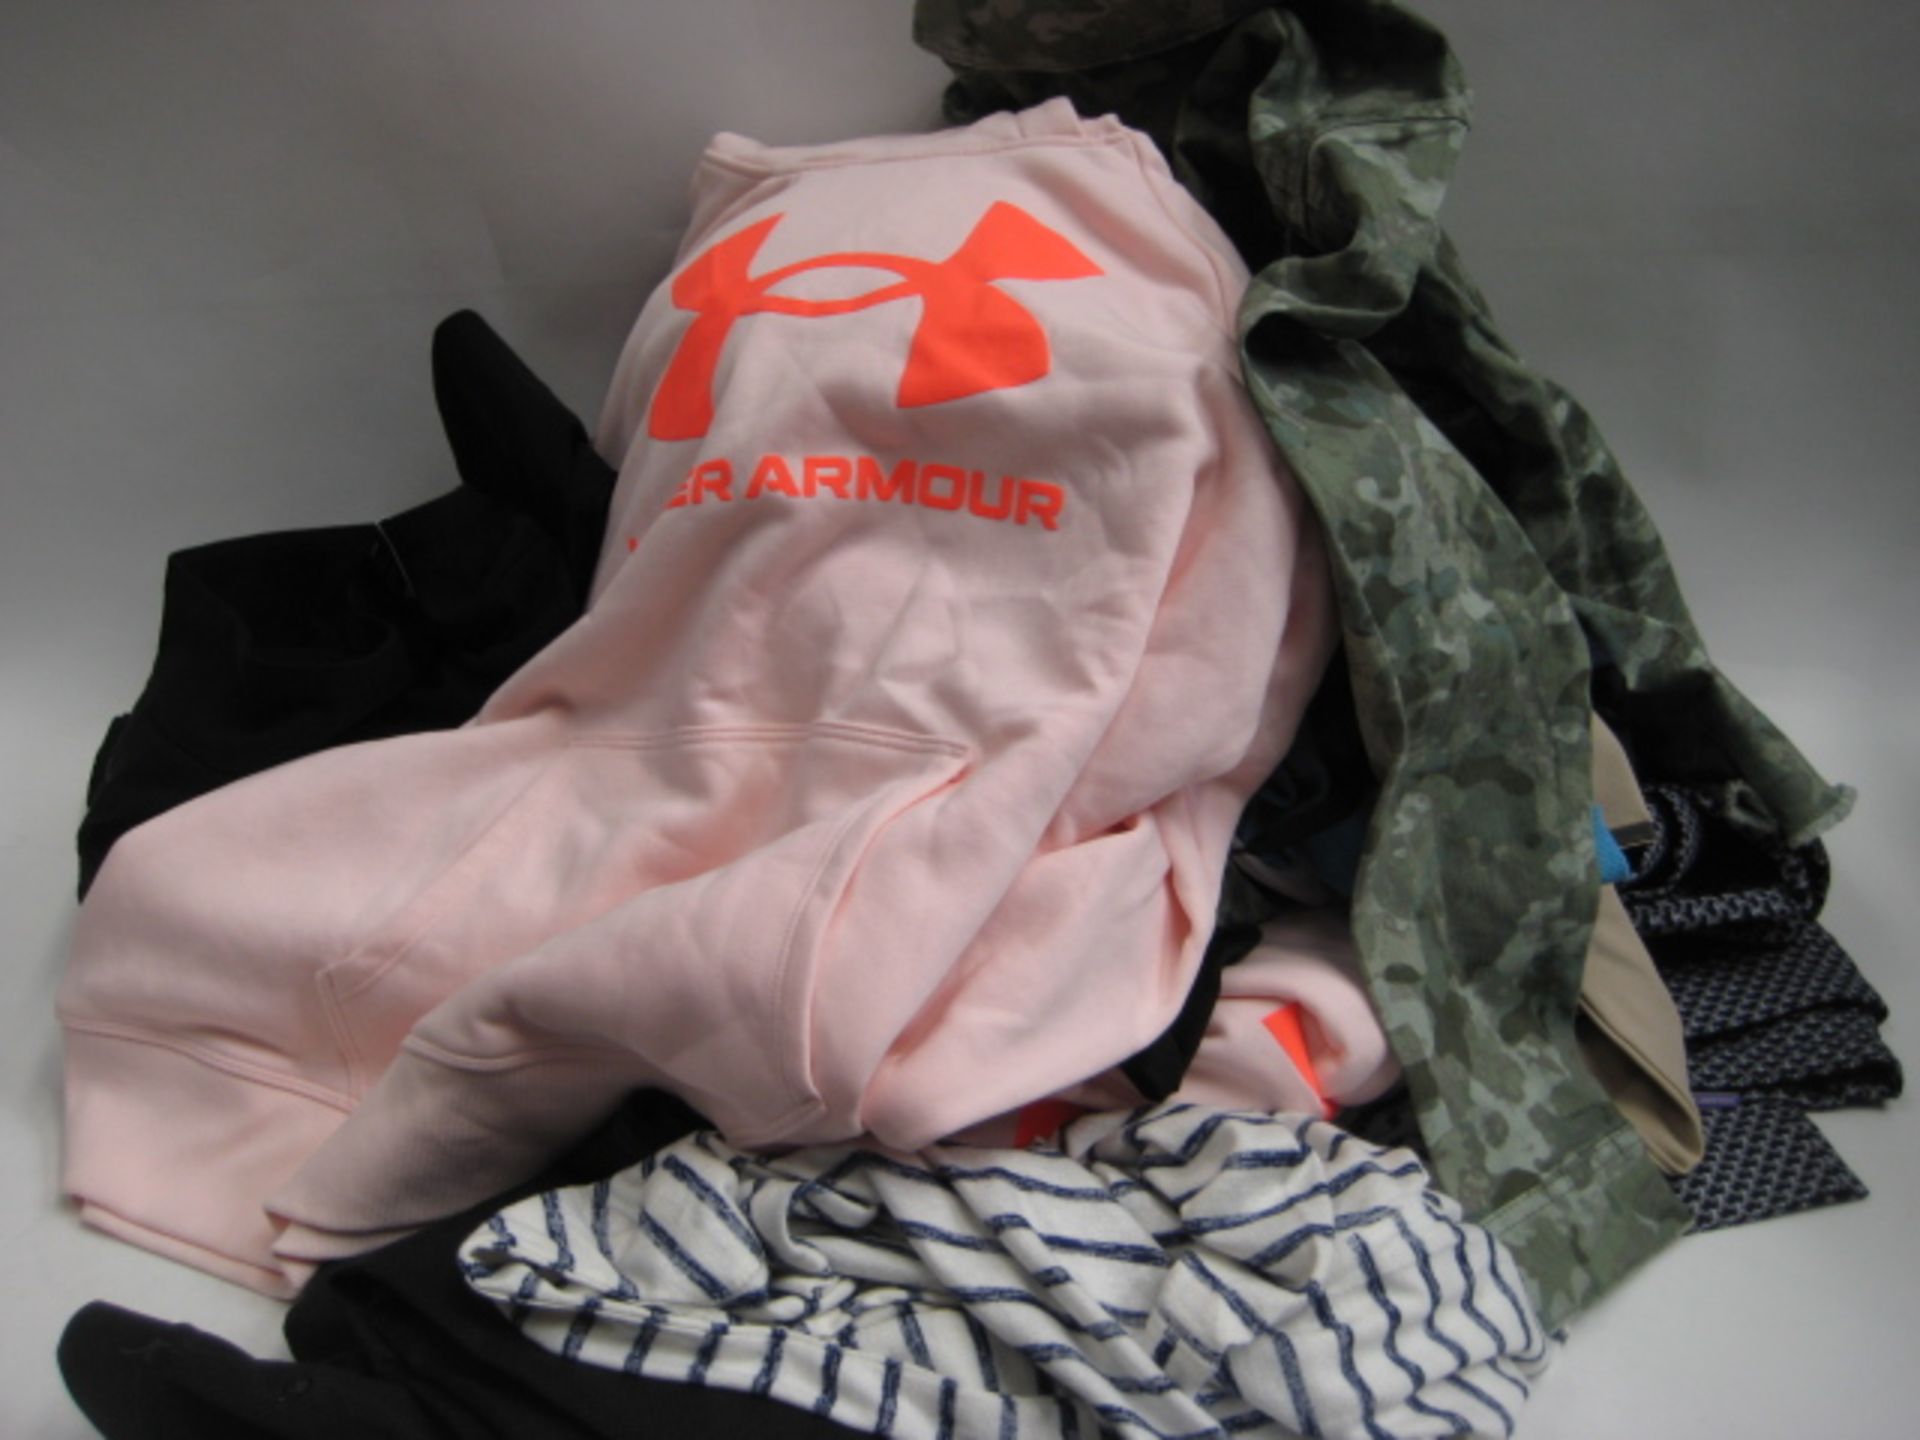 Bag containing ladies clothing to include 2 Under Armour hoodies in pink and light blue, camo jacket